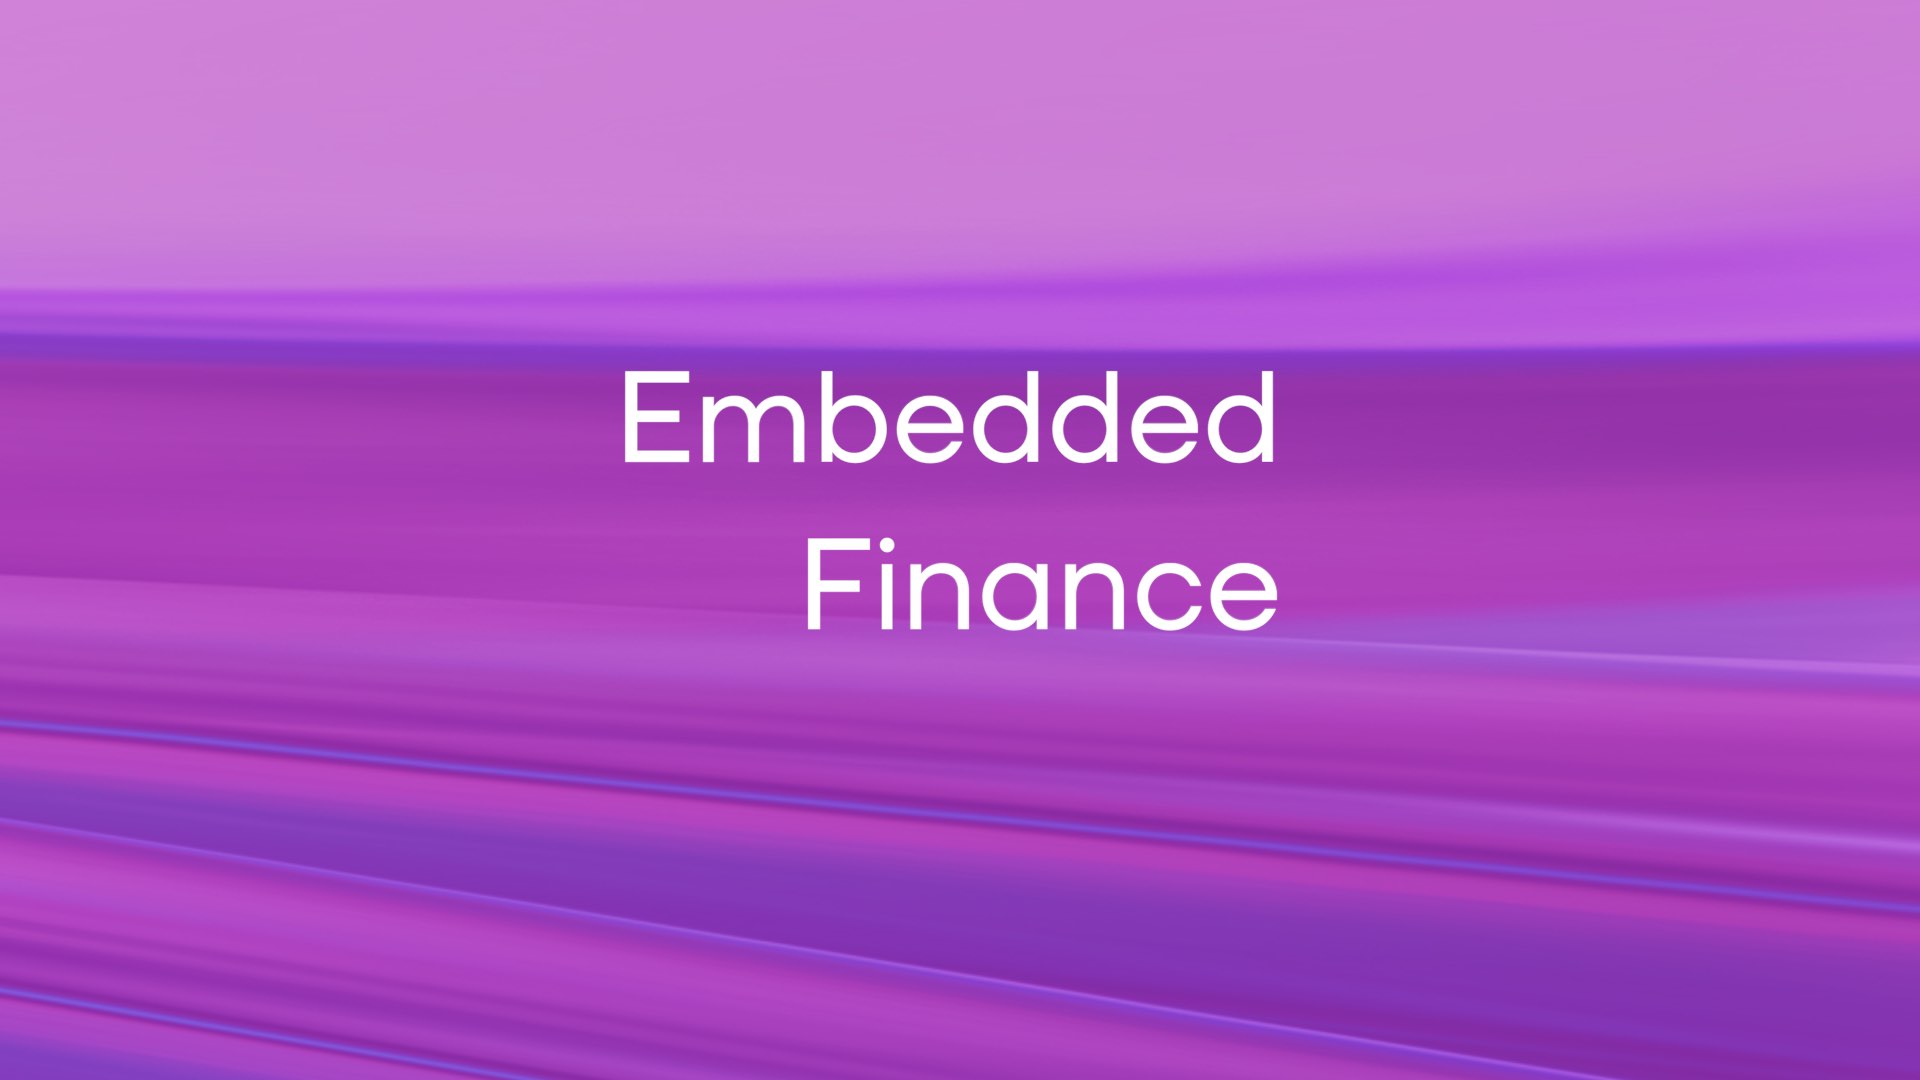 Embedded Finance: Lowering Barriers for Entry of Strengthening Incumbent Market Positioning